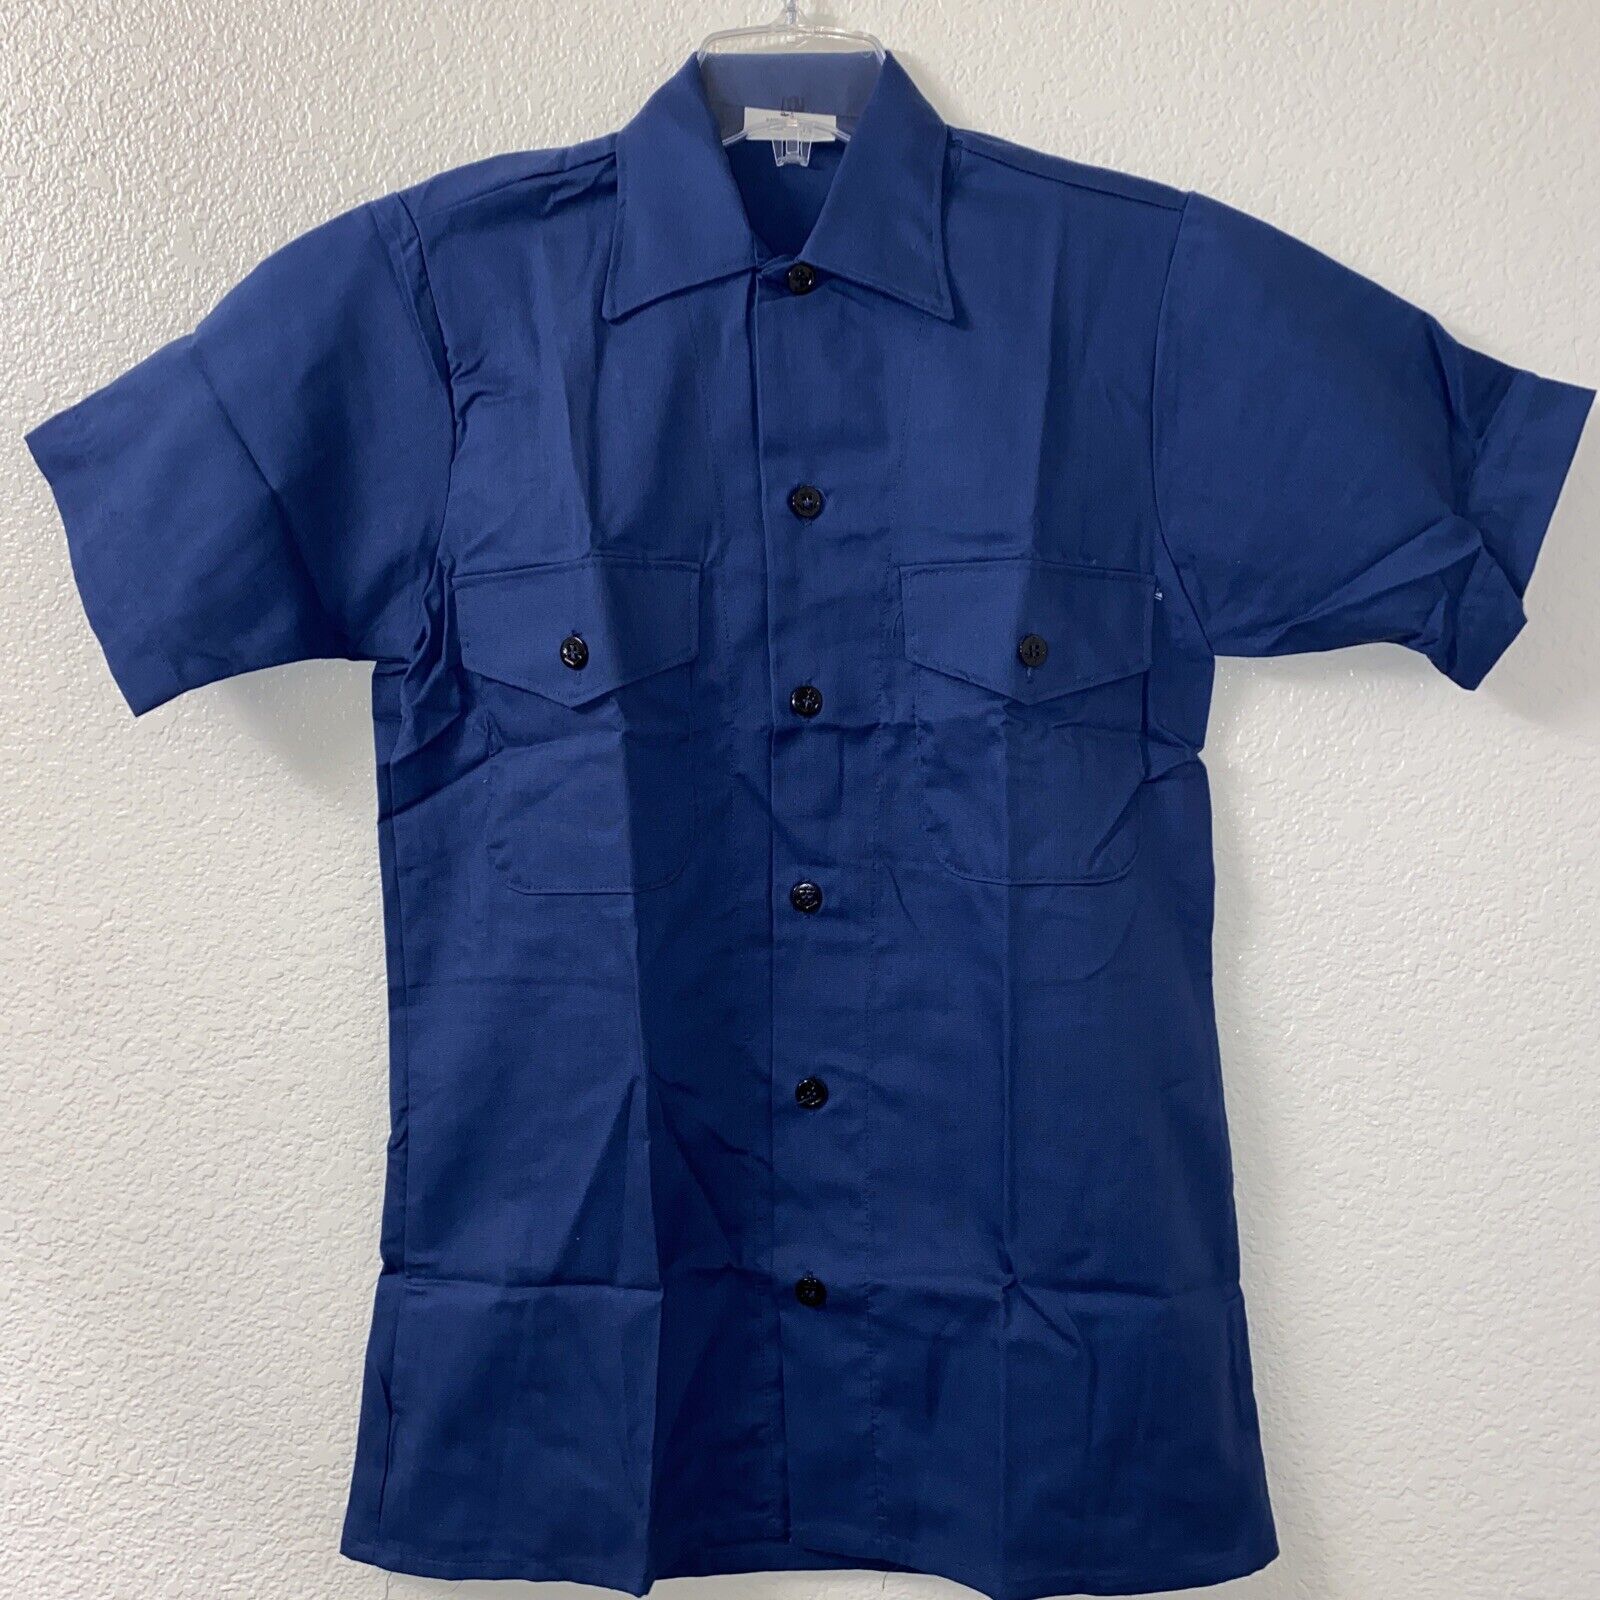 Vintage NEW Deadstock US NAVY USN Men's Blue Poly/Cotton Utility Shirt ~ Small